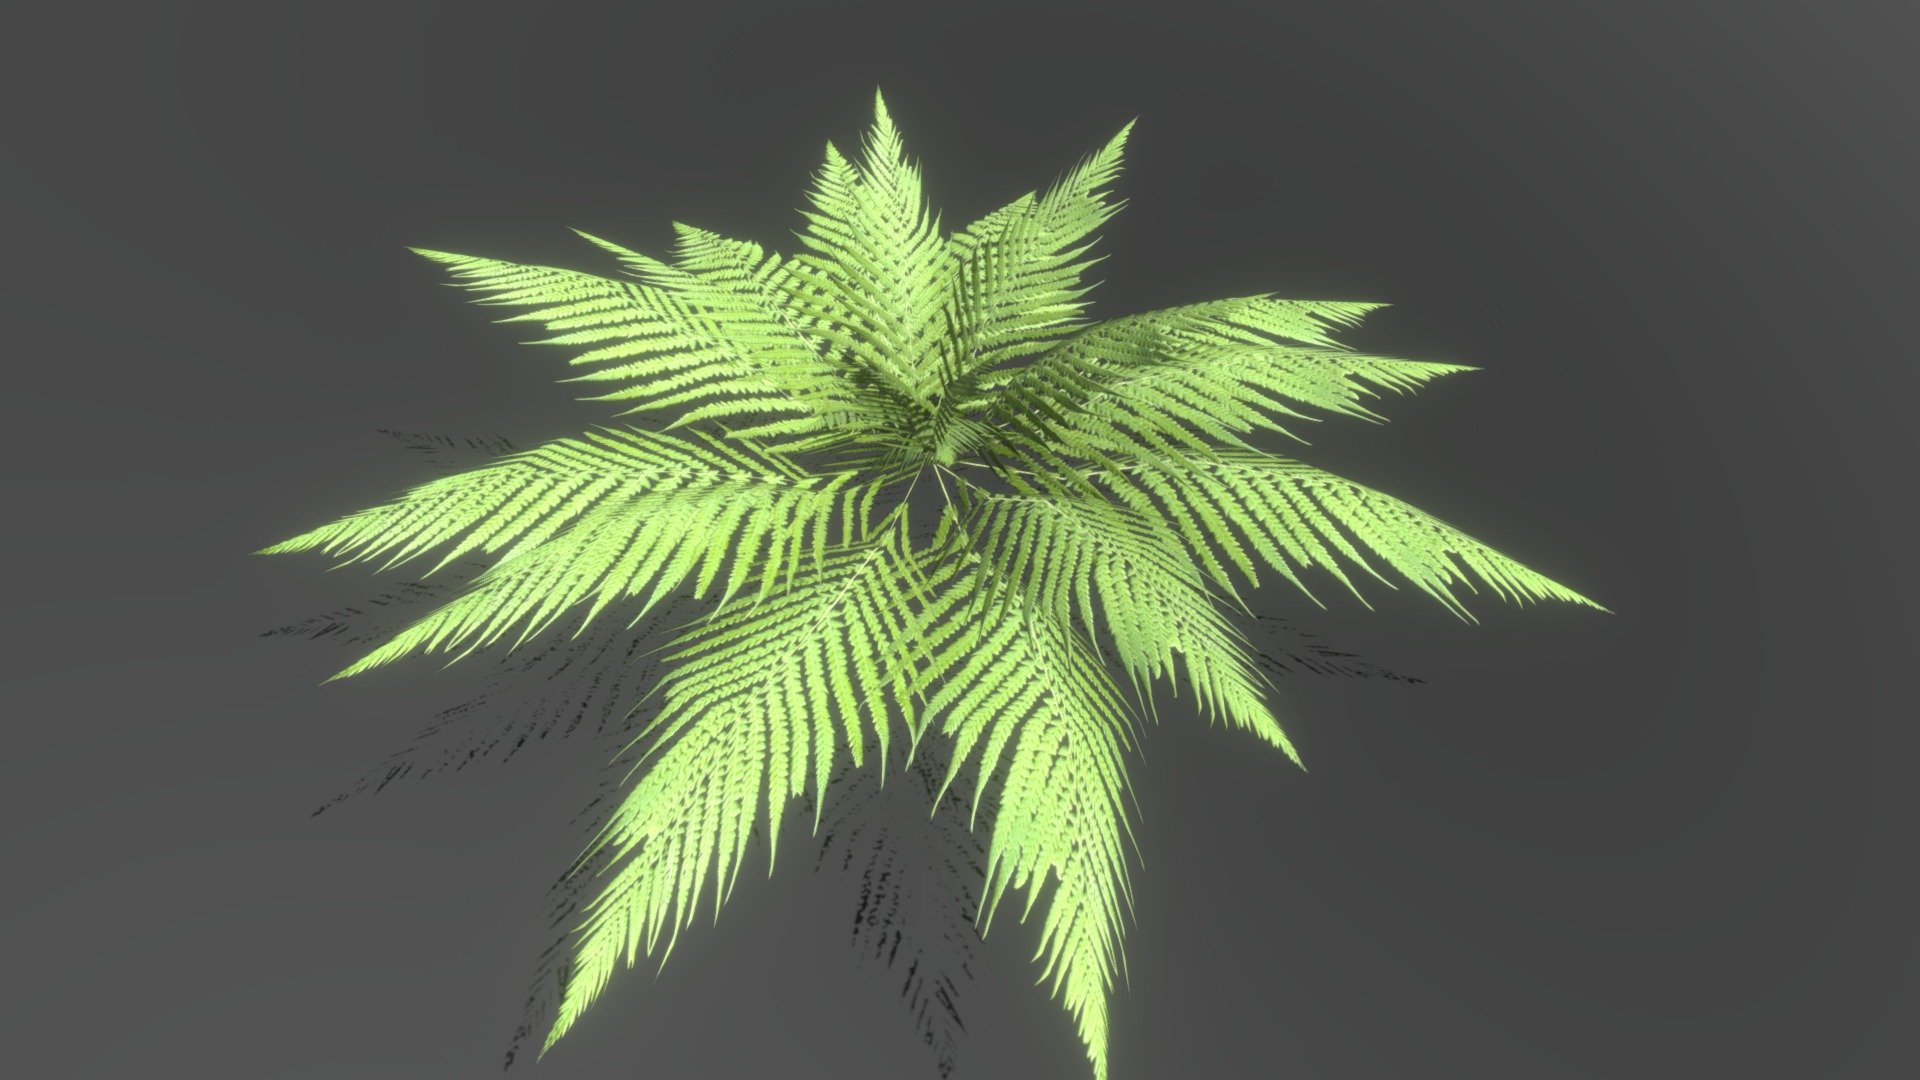 Low-poly Tropical plant. Created with 3Ds max2018. Export in FBX. Model have diffuse, opacity, normal texture maps - Fern - 3D model by Ybreibyf 3d model